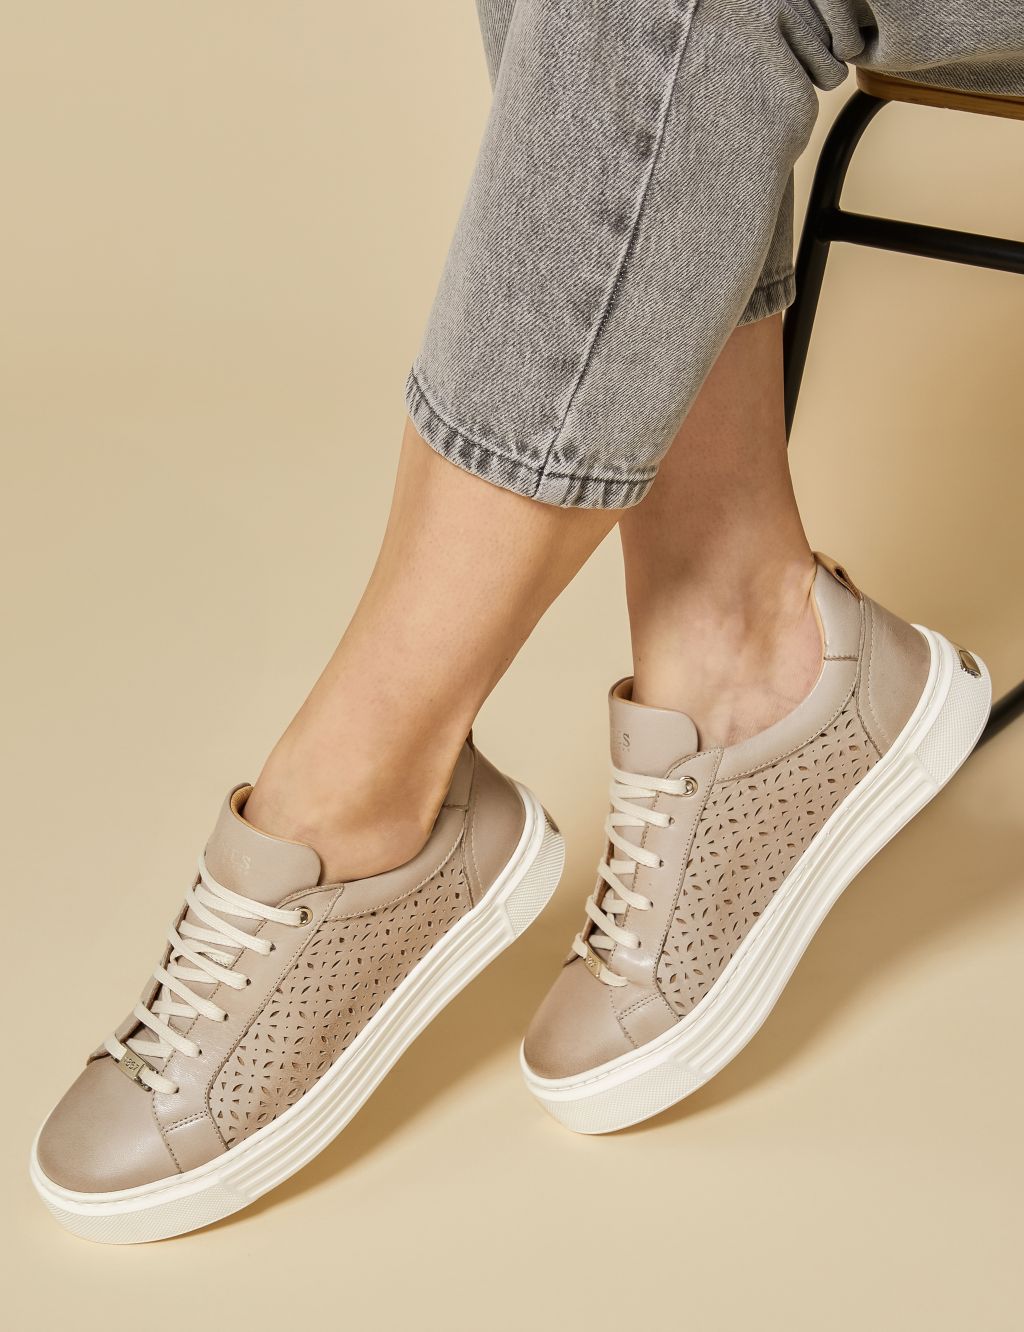 Leather Lace Up Perforated Flatform Trainers image 1